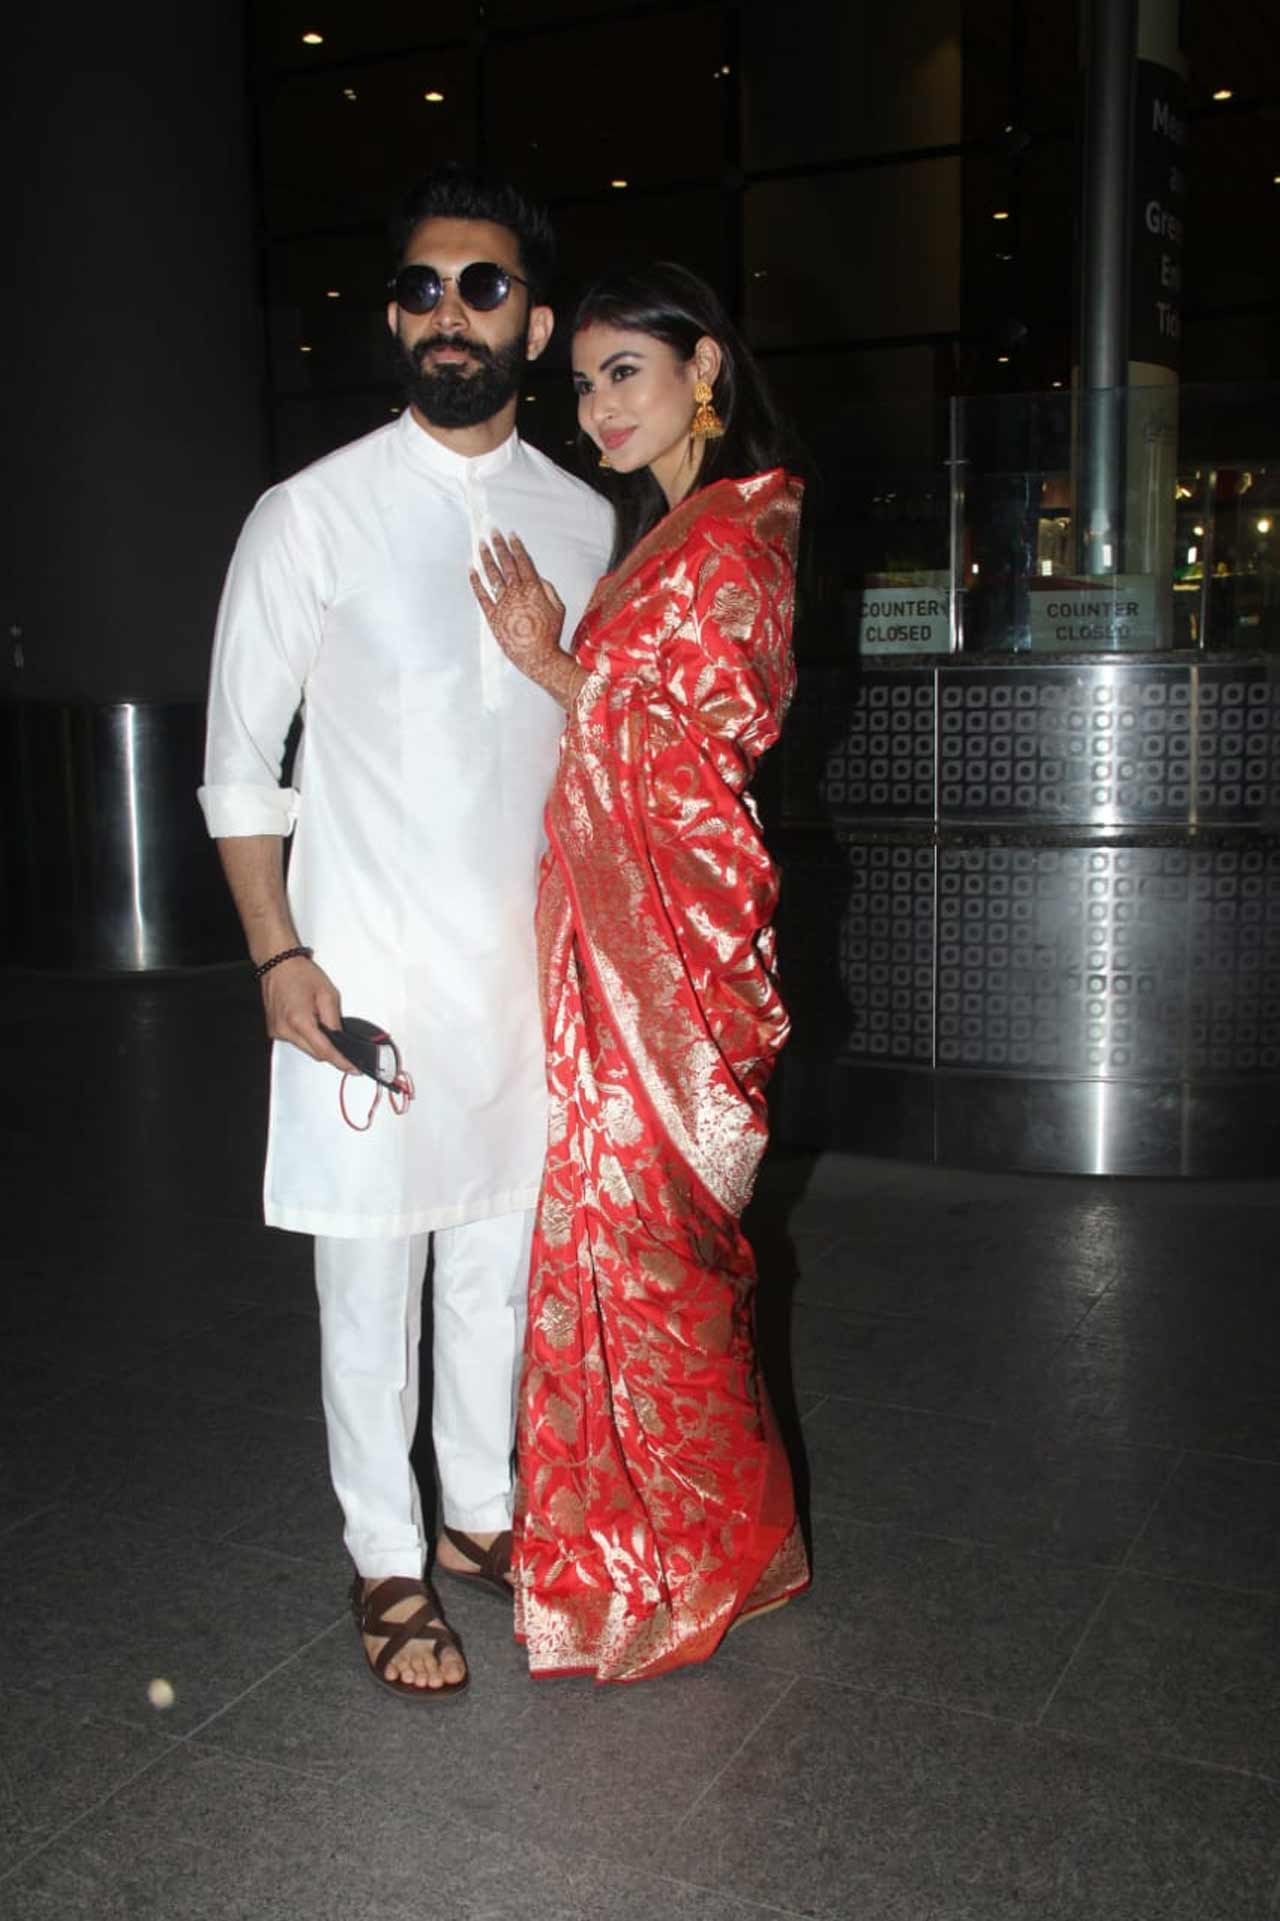 Mouni stunned in a white saree, whereas the groom, who opted for a South inspired ensemble - a beige coloured kurta, paired with a lungi, showed off his uber-cool side in this simple outfit for their first wedding which followed all South Indian traditions.